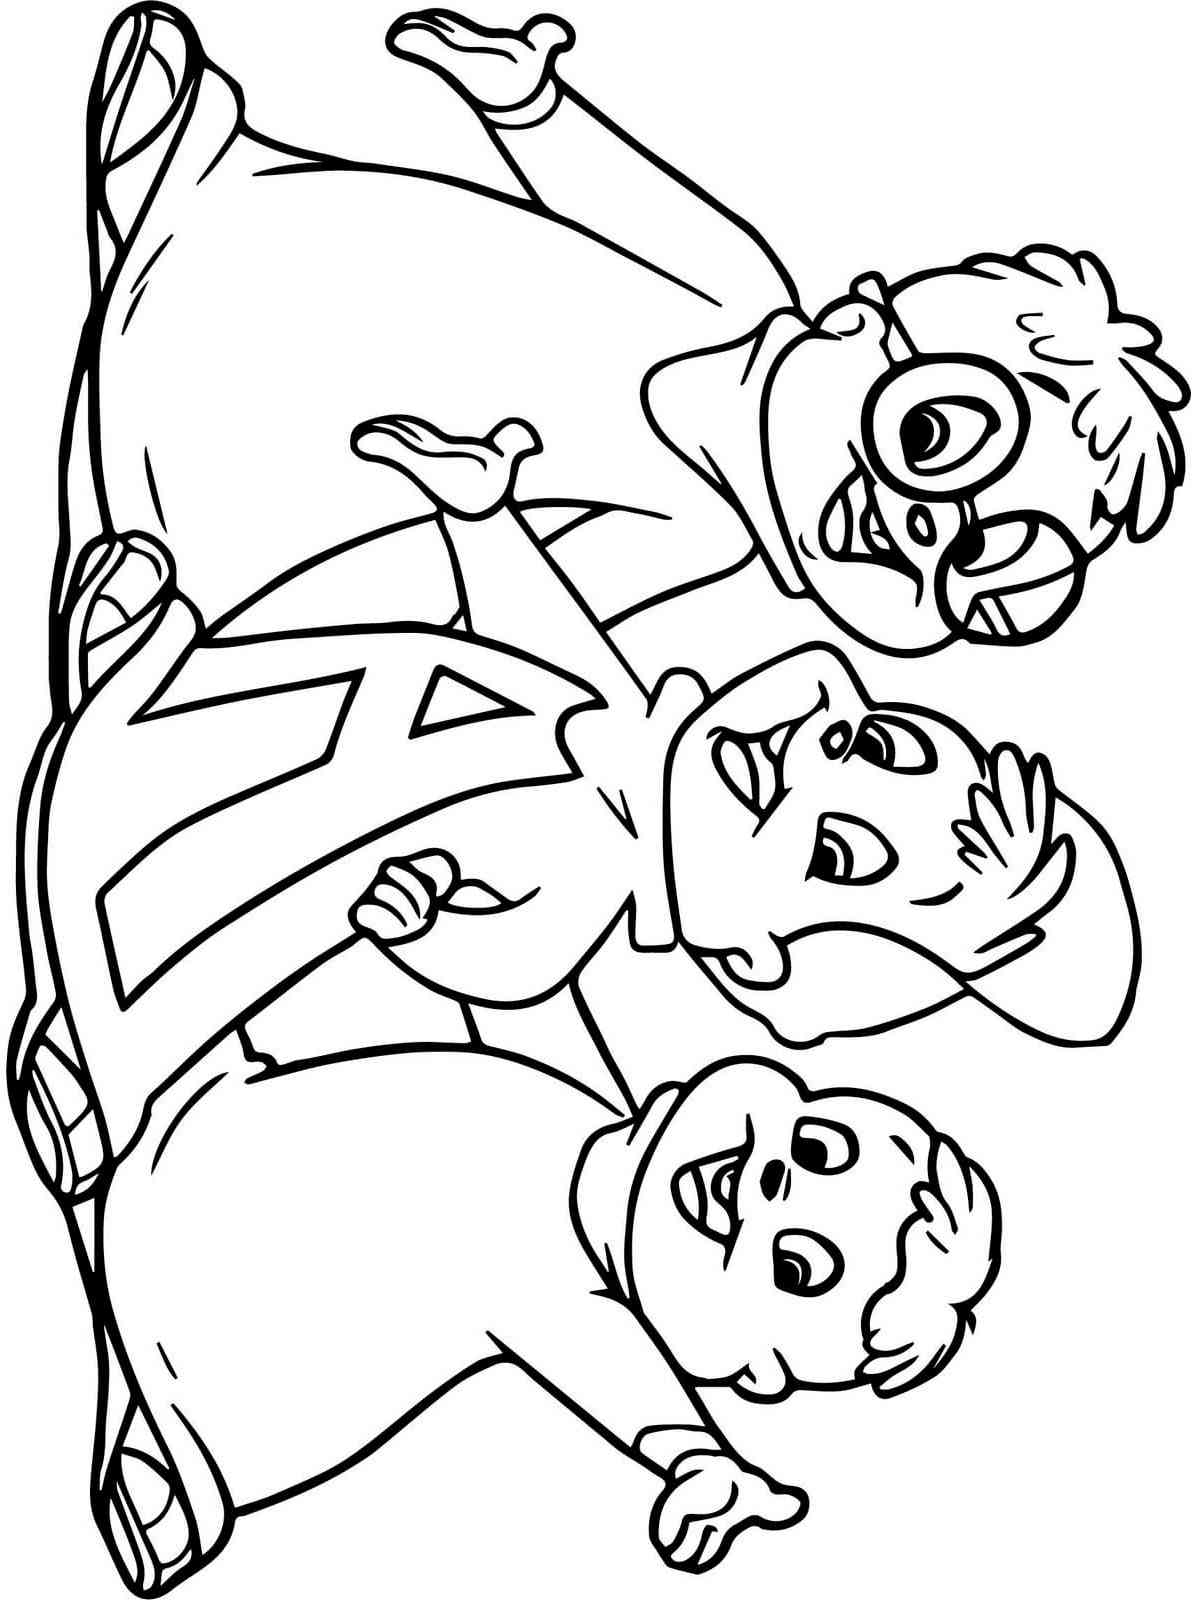 Happy Alvin and the Chipmunks coloring page